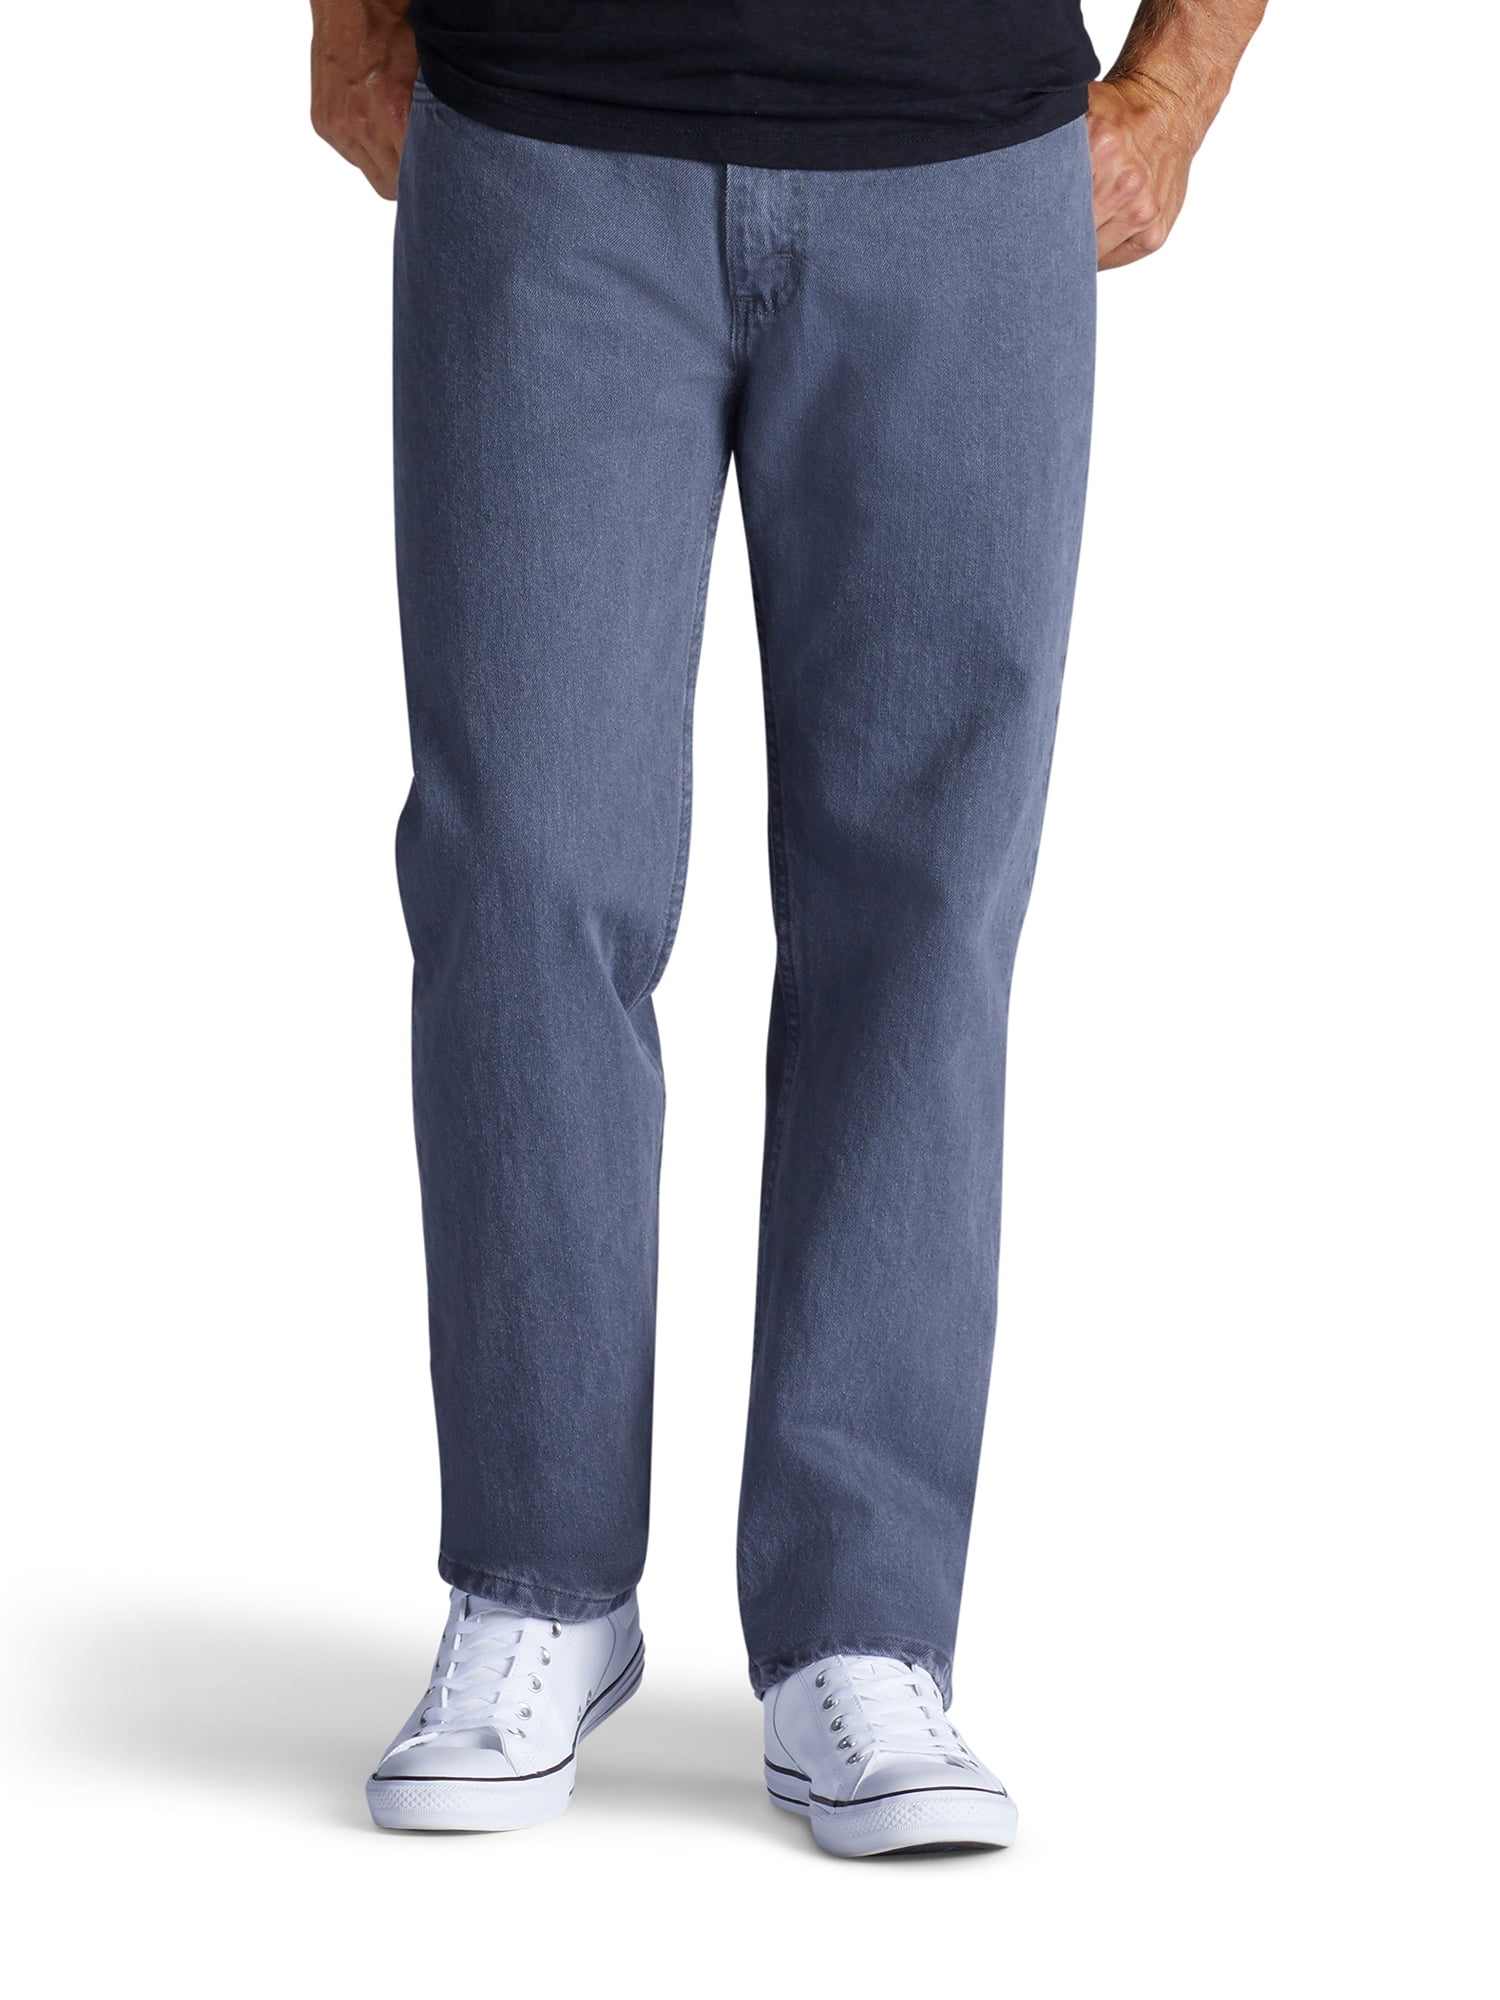 men's relaxed fit straight leg jeans